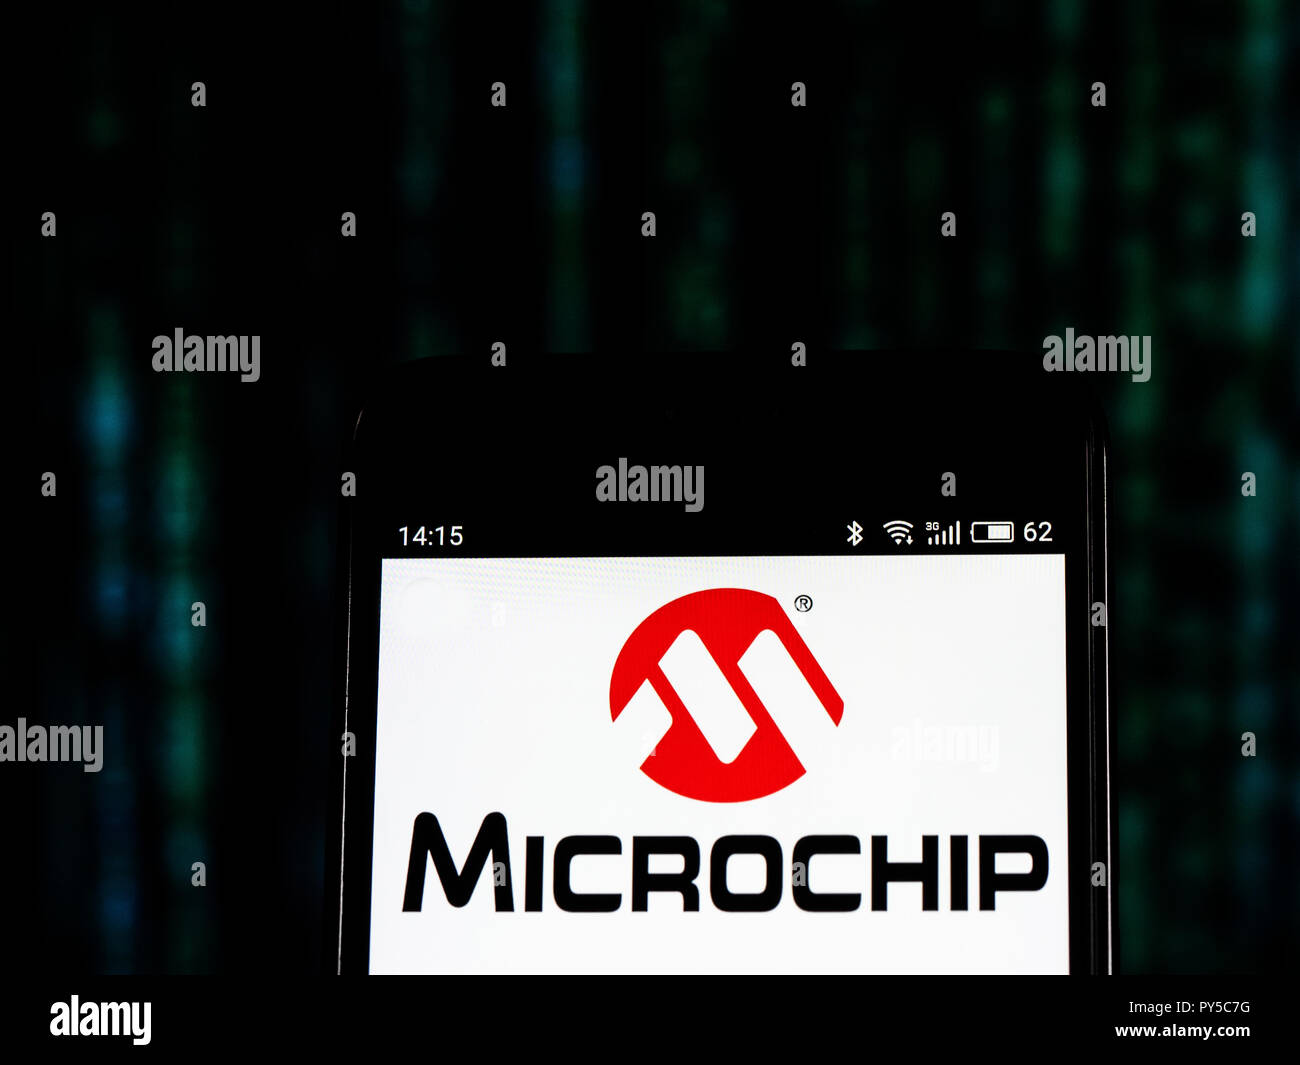 Microchip Technology Corporation logo seen displayed on smart phone. Microchip Technology Inc. is an American publicly-listed corporation that is a manufacturer of microcontroller, mixed-signal, analog and Flash-IP integrated circuits. Stock Photo